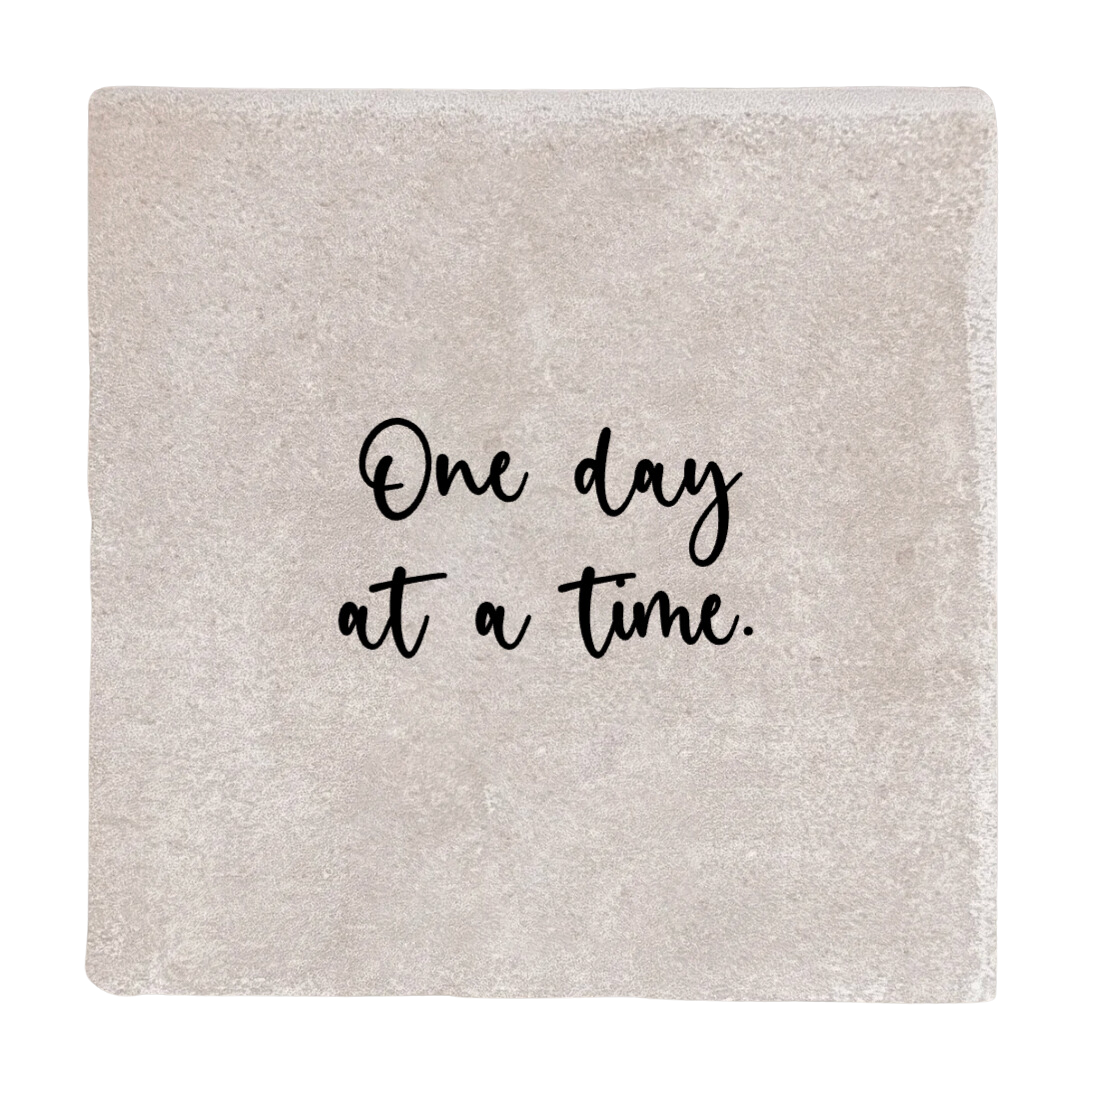 Label2X Tegeltje one day at a time woonaccessoires homedecoratie